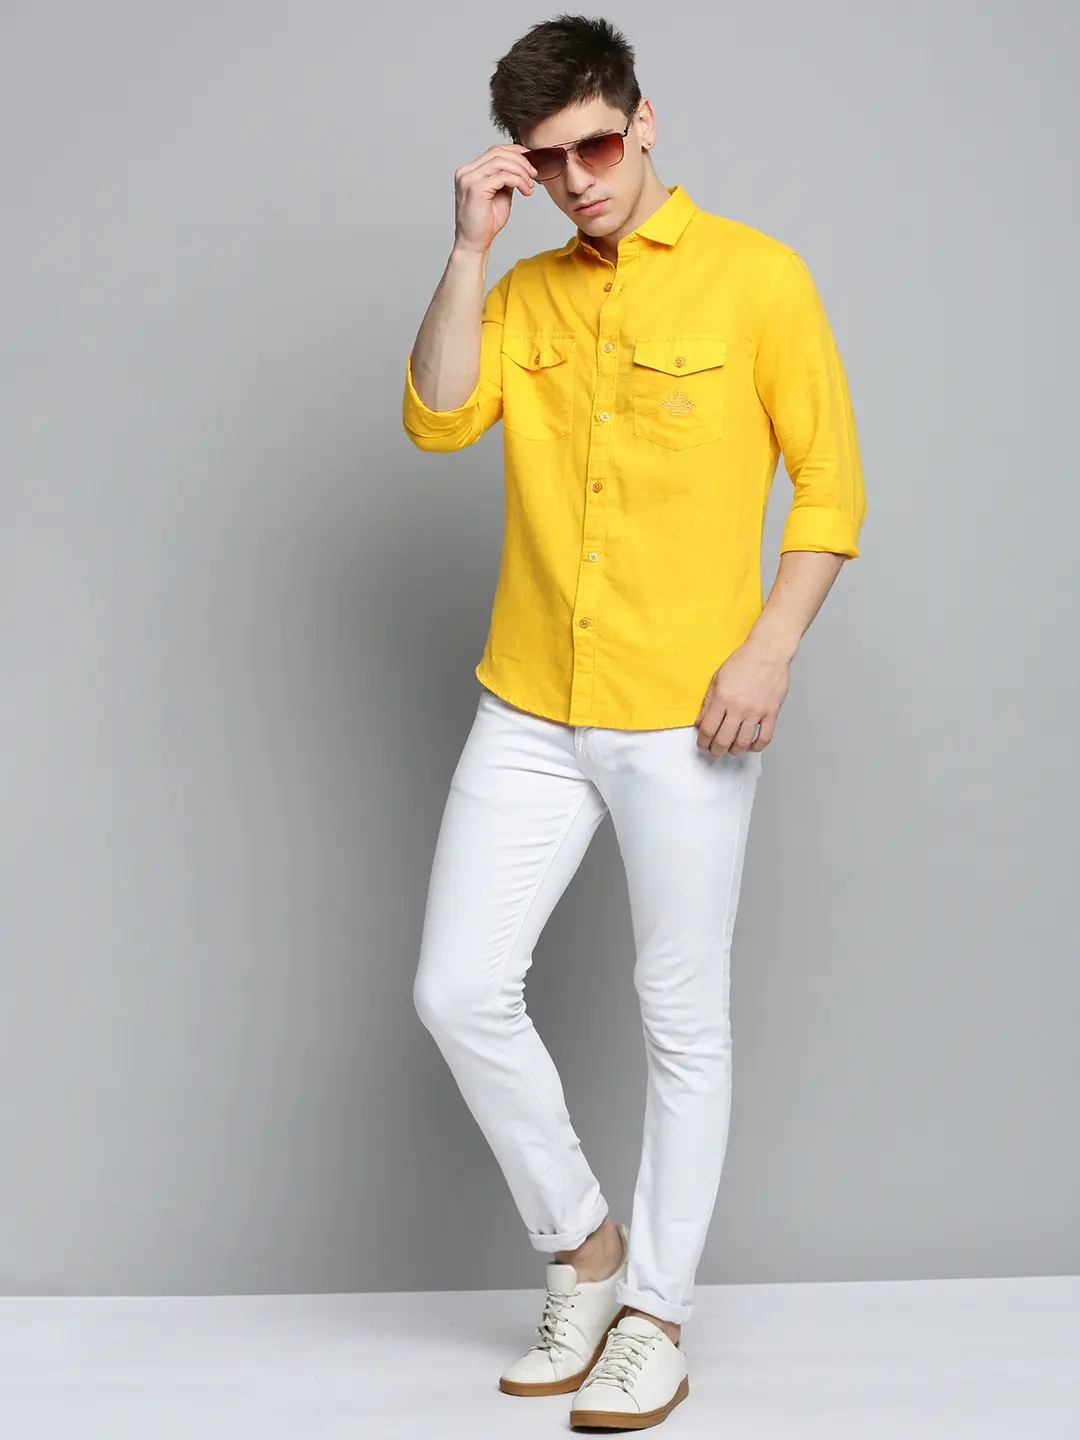 SHOWOFF Men's Spread Collar Yellow Solid Shirt